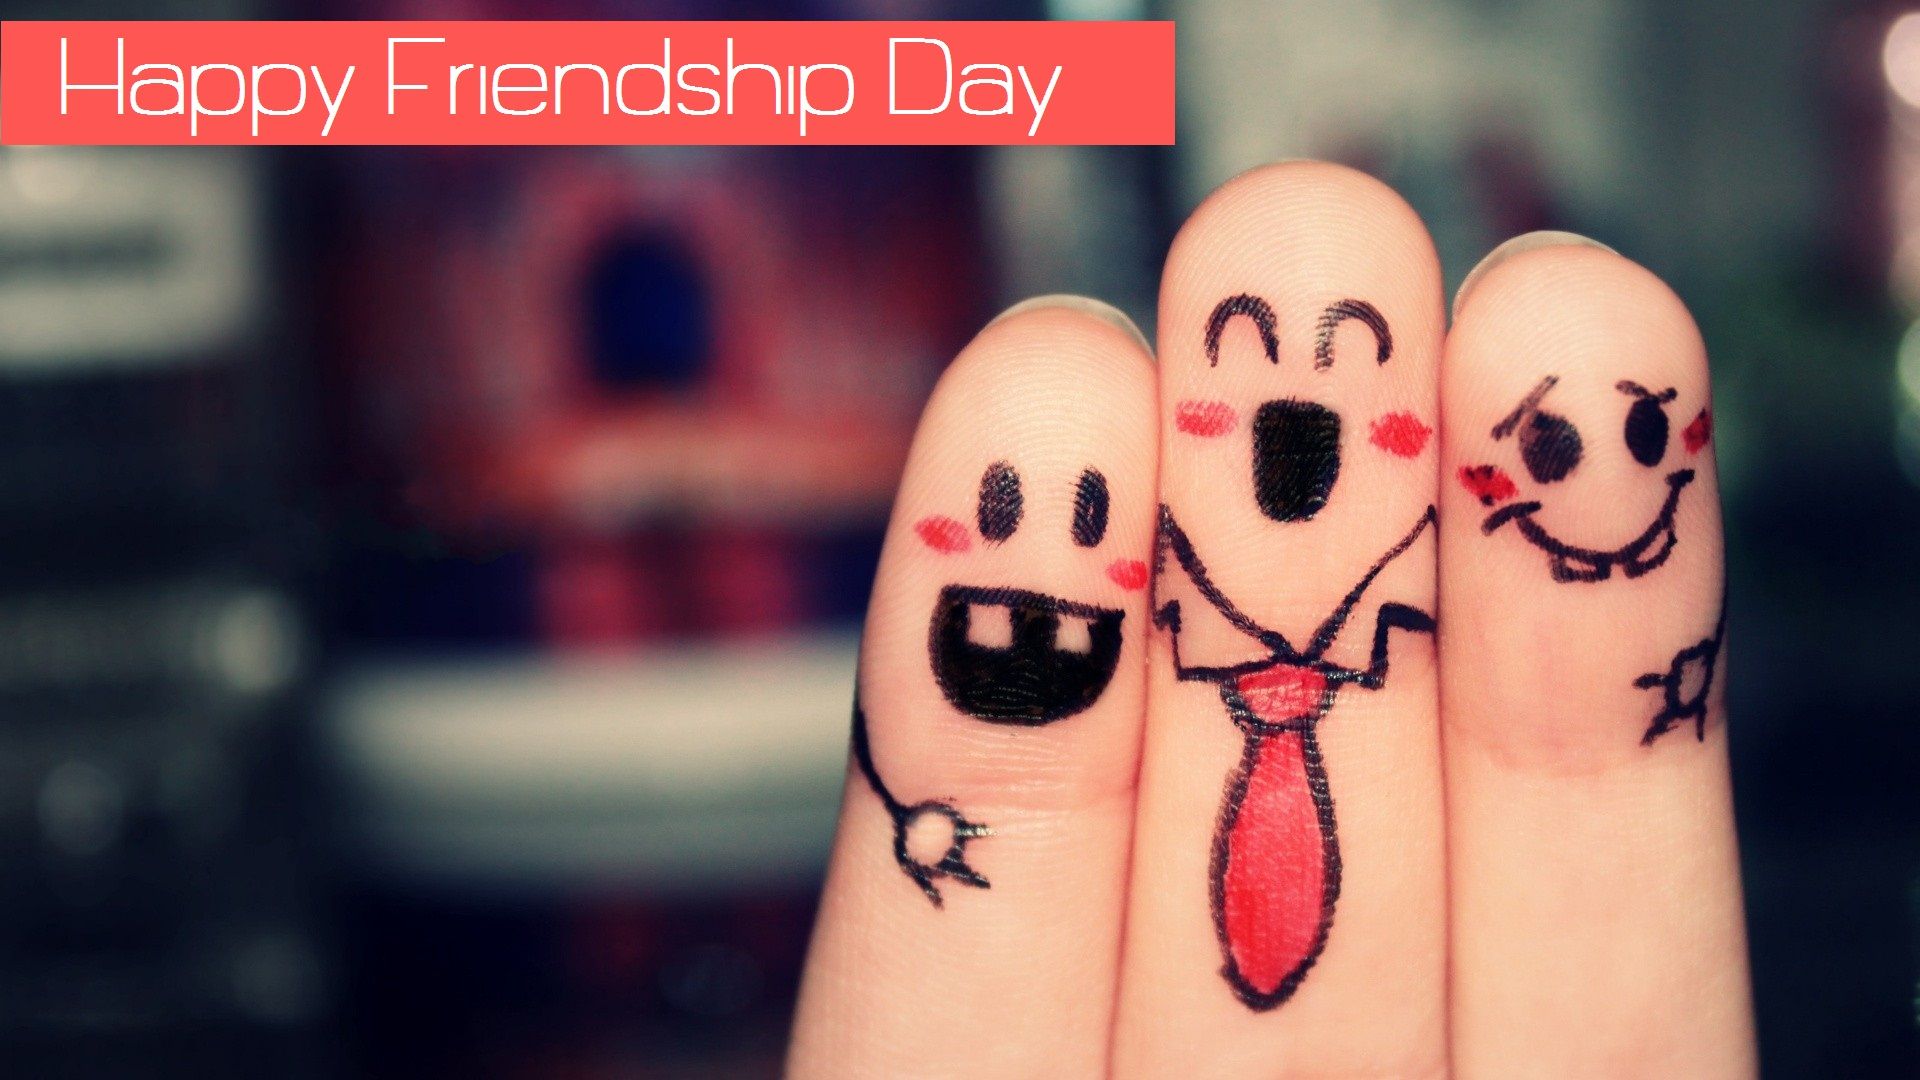 Happy Friendship Day 2016 Image HD 3D Wallpaper Free Download For Facebook Whatsapp Desktop Background Image